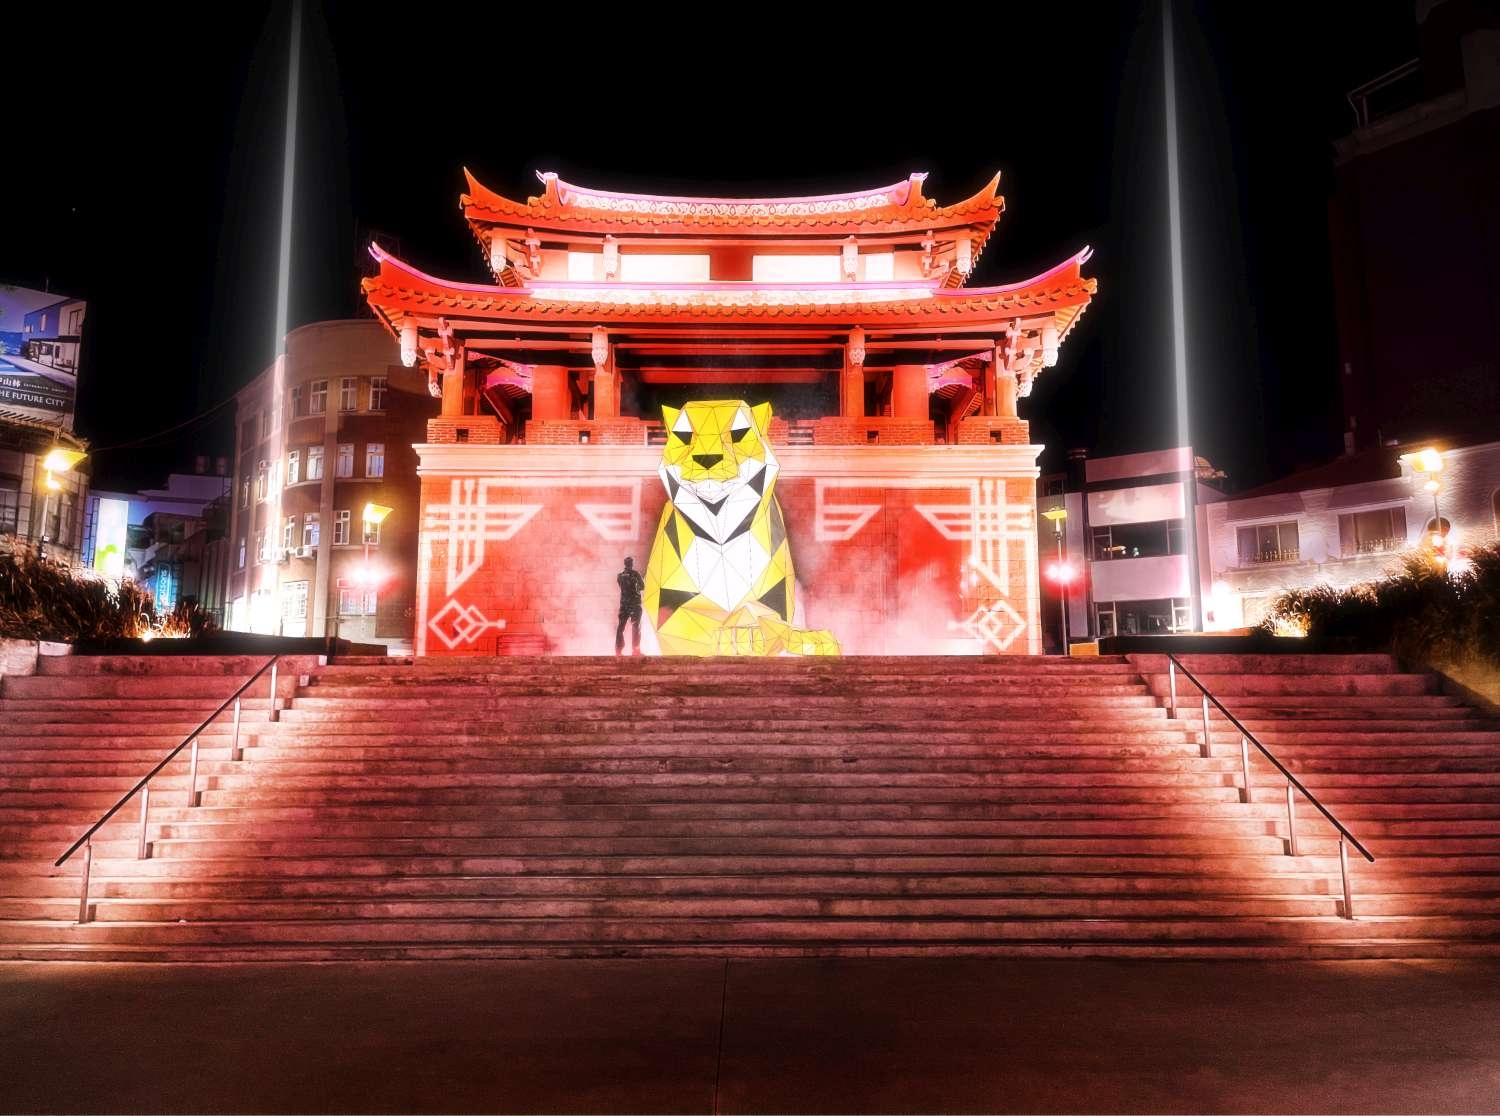 The new landmark "Light Tiger" in Hsinchu City will light up the East Gate City from January 21